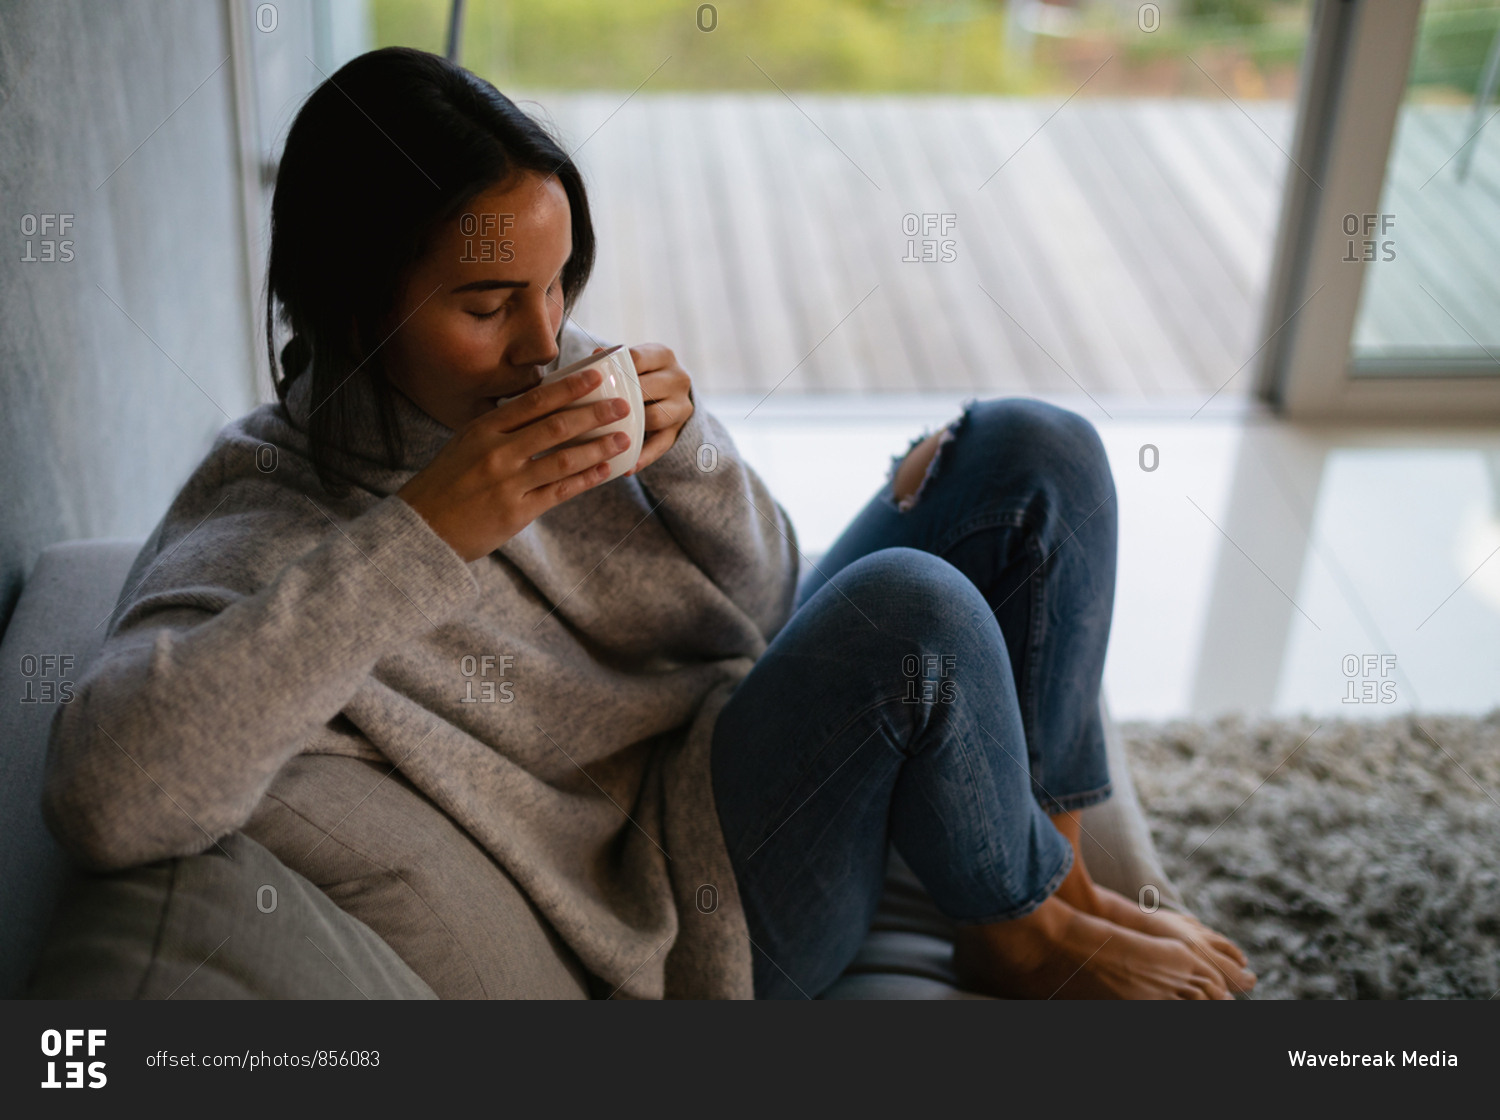 Elevated view of a young Caucasian brunette woman sitting on a sofa with her legs drawn up enjoying a cup of coffee